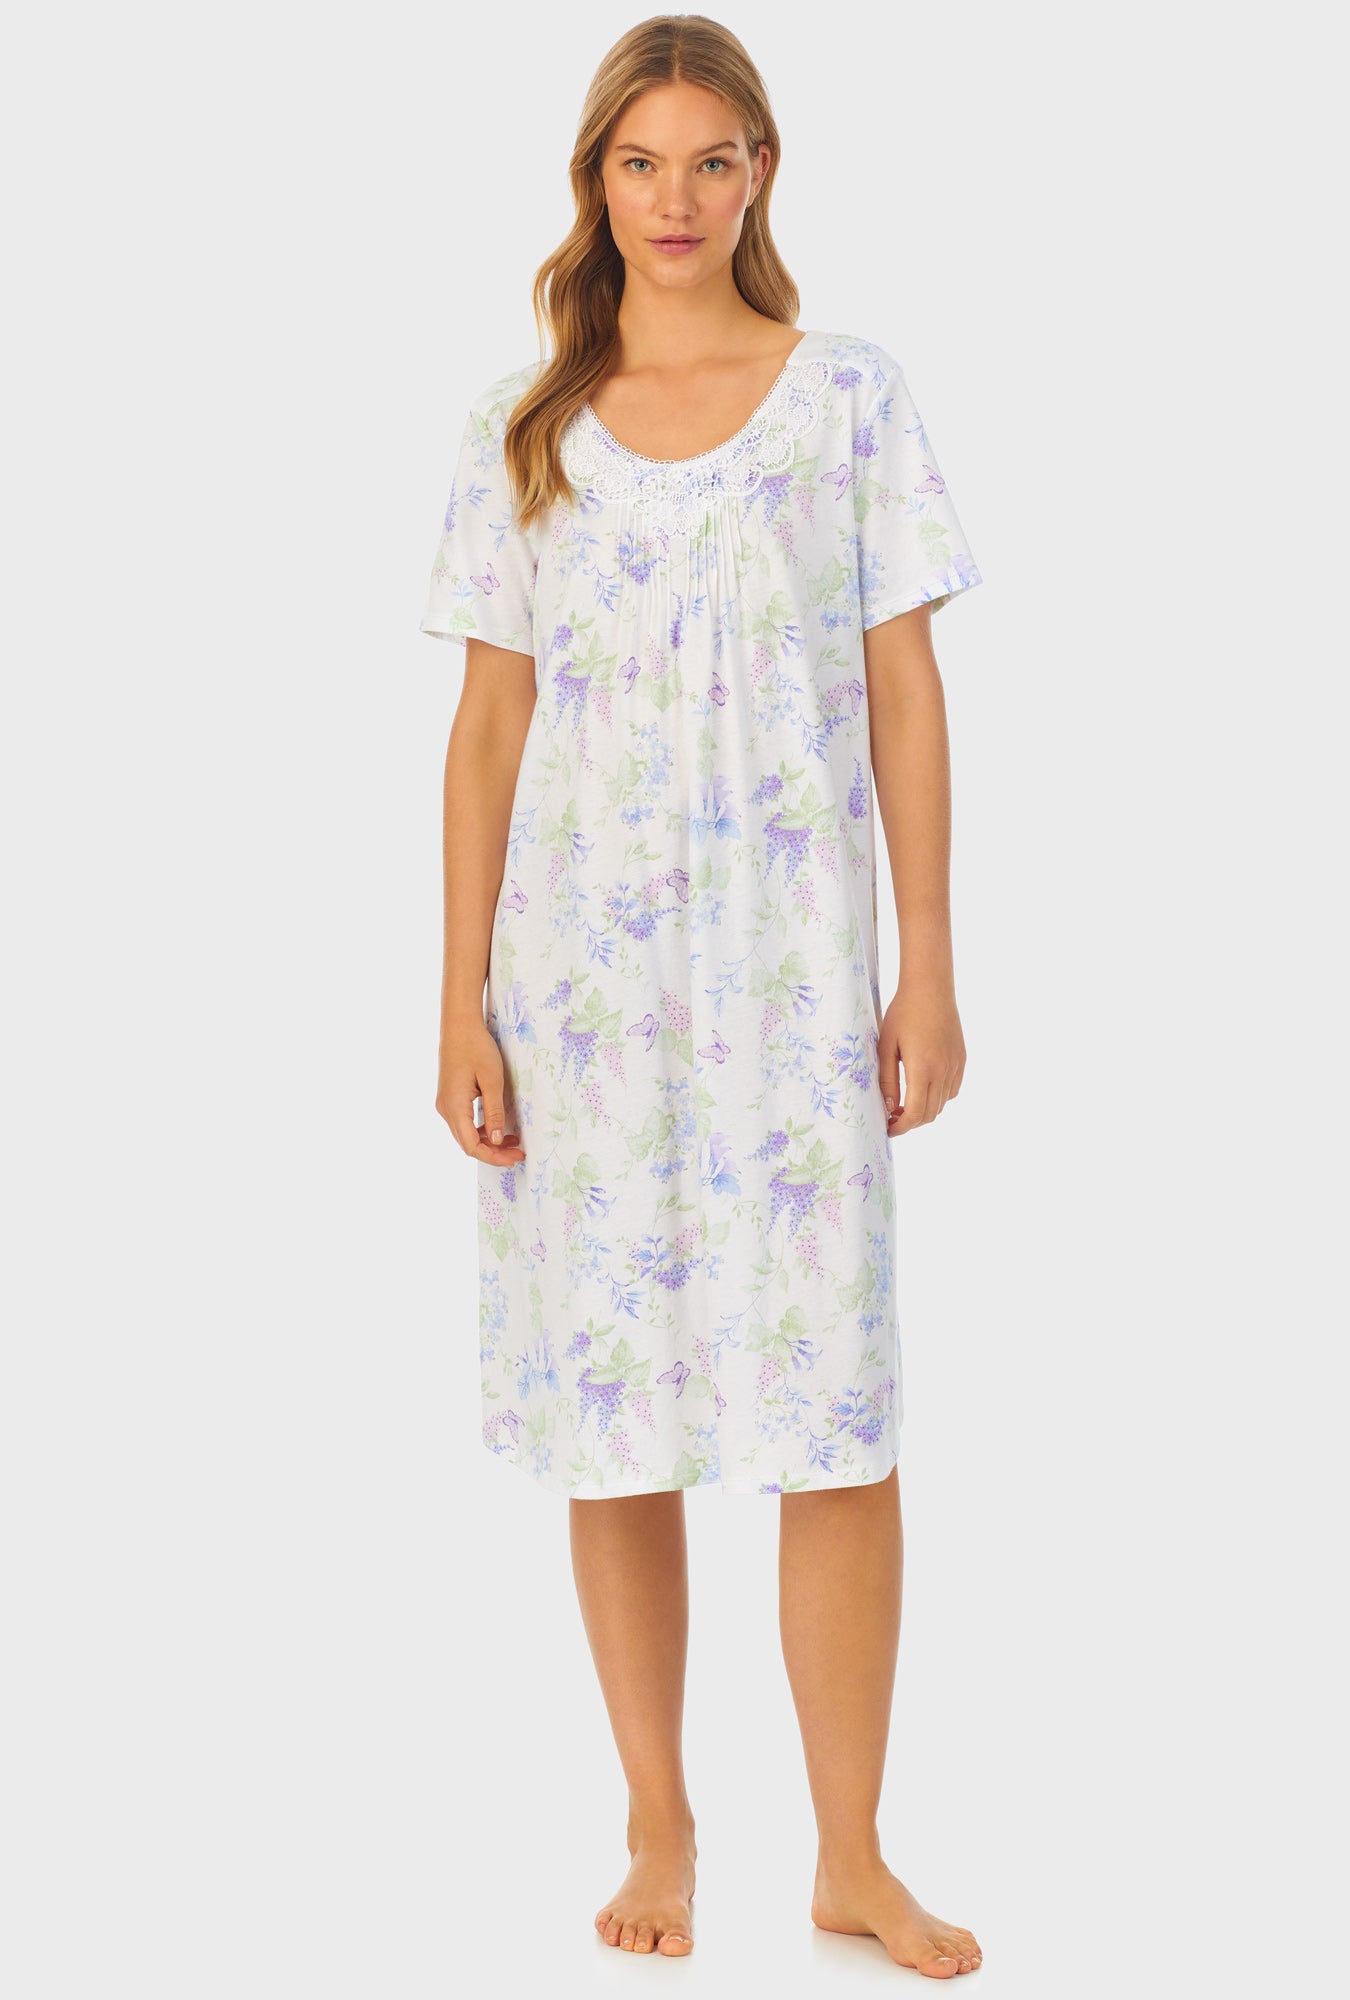 A lady wearing Cotton Waltz Nightgown with Butterfly Garden print